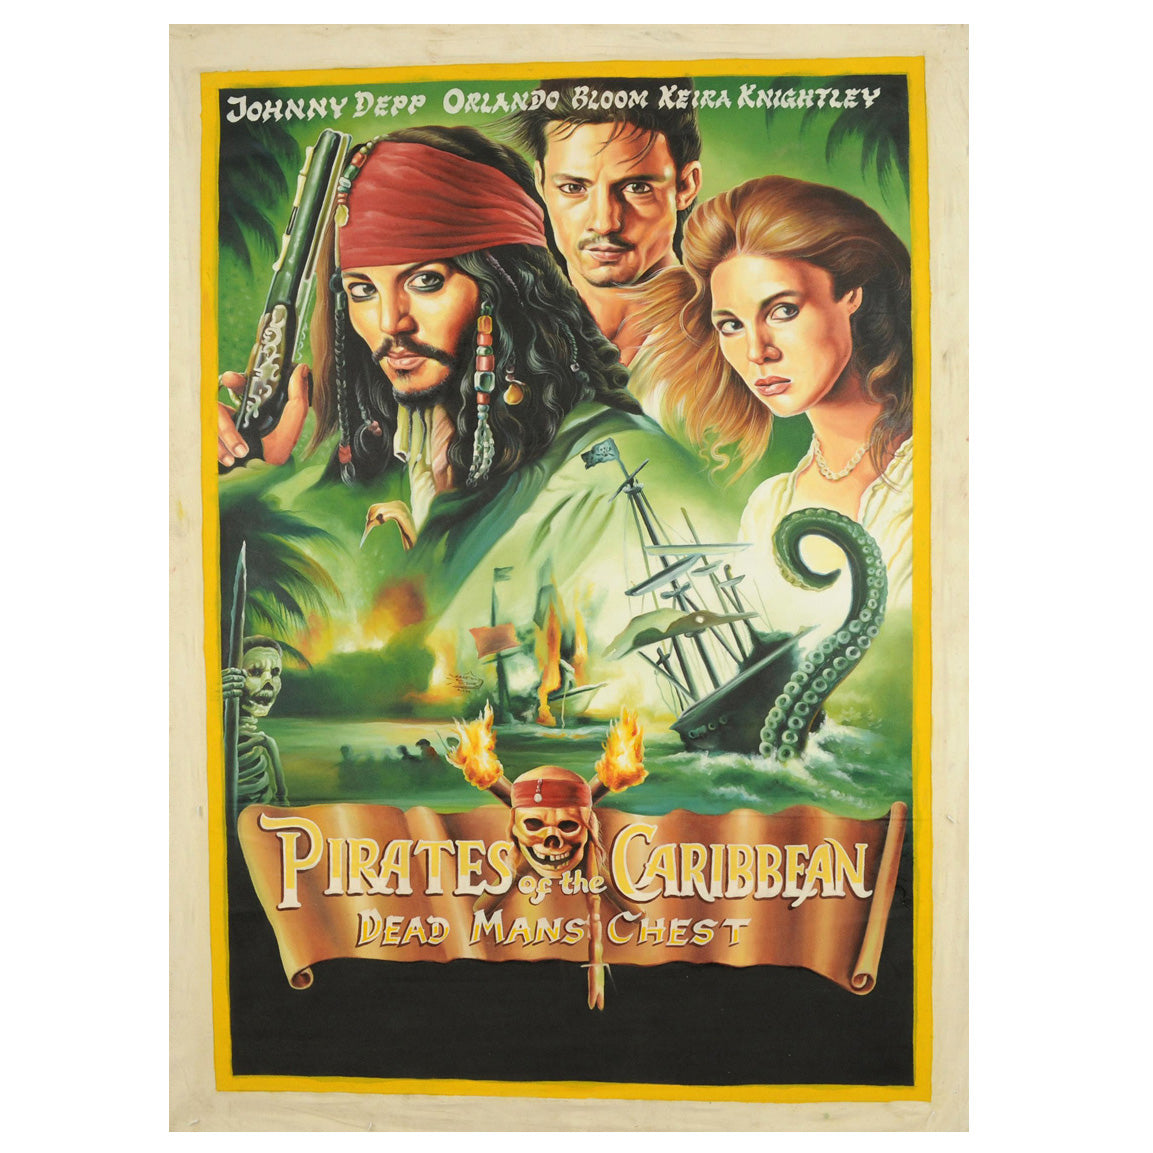 PIRATES OF THE CARIBBEAN MOVIE POSTER HAND PAINTED IN GHANA FOR THE LOCAL CINEMA